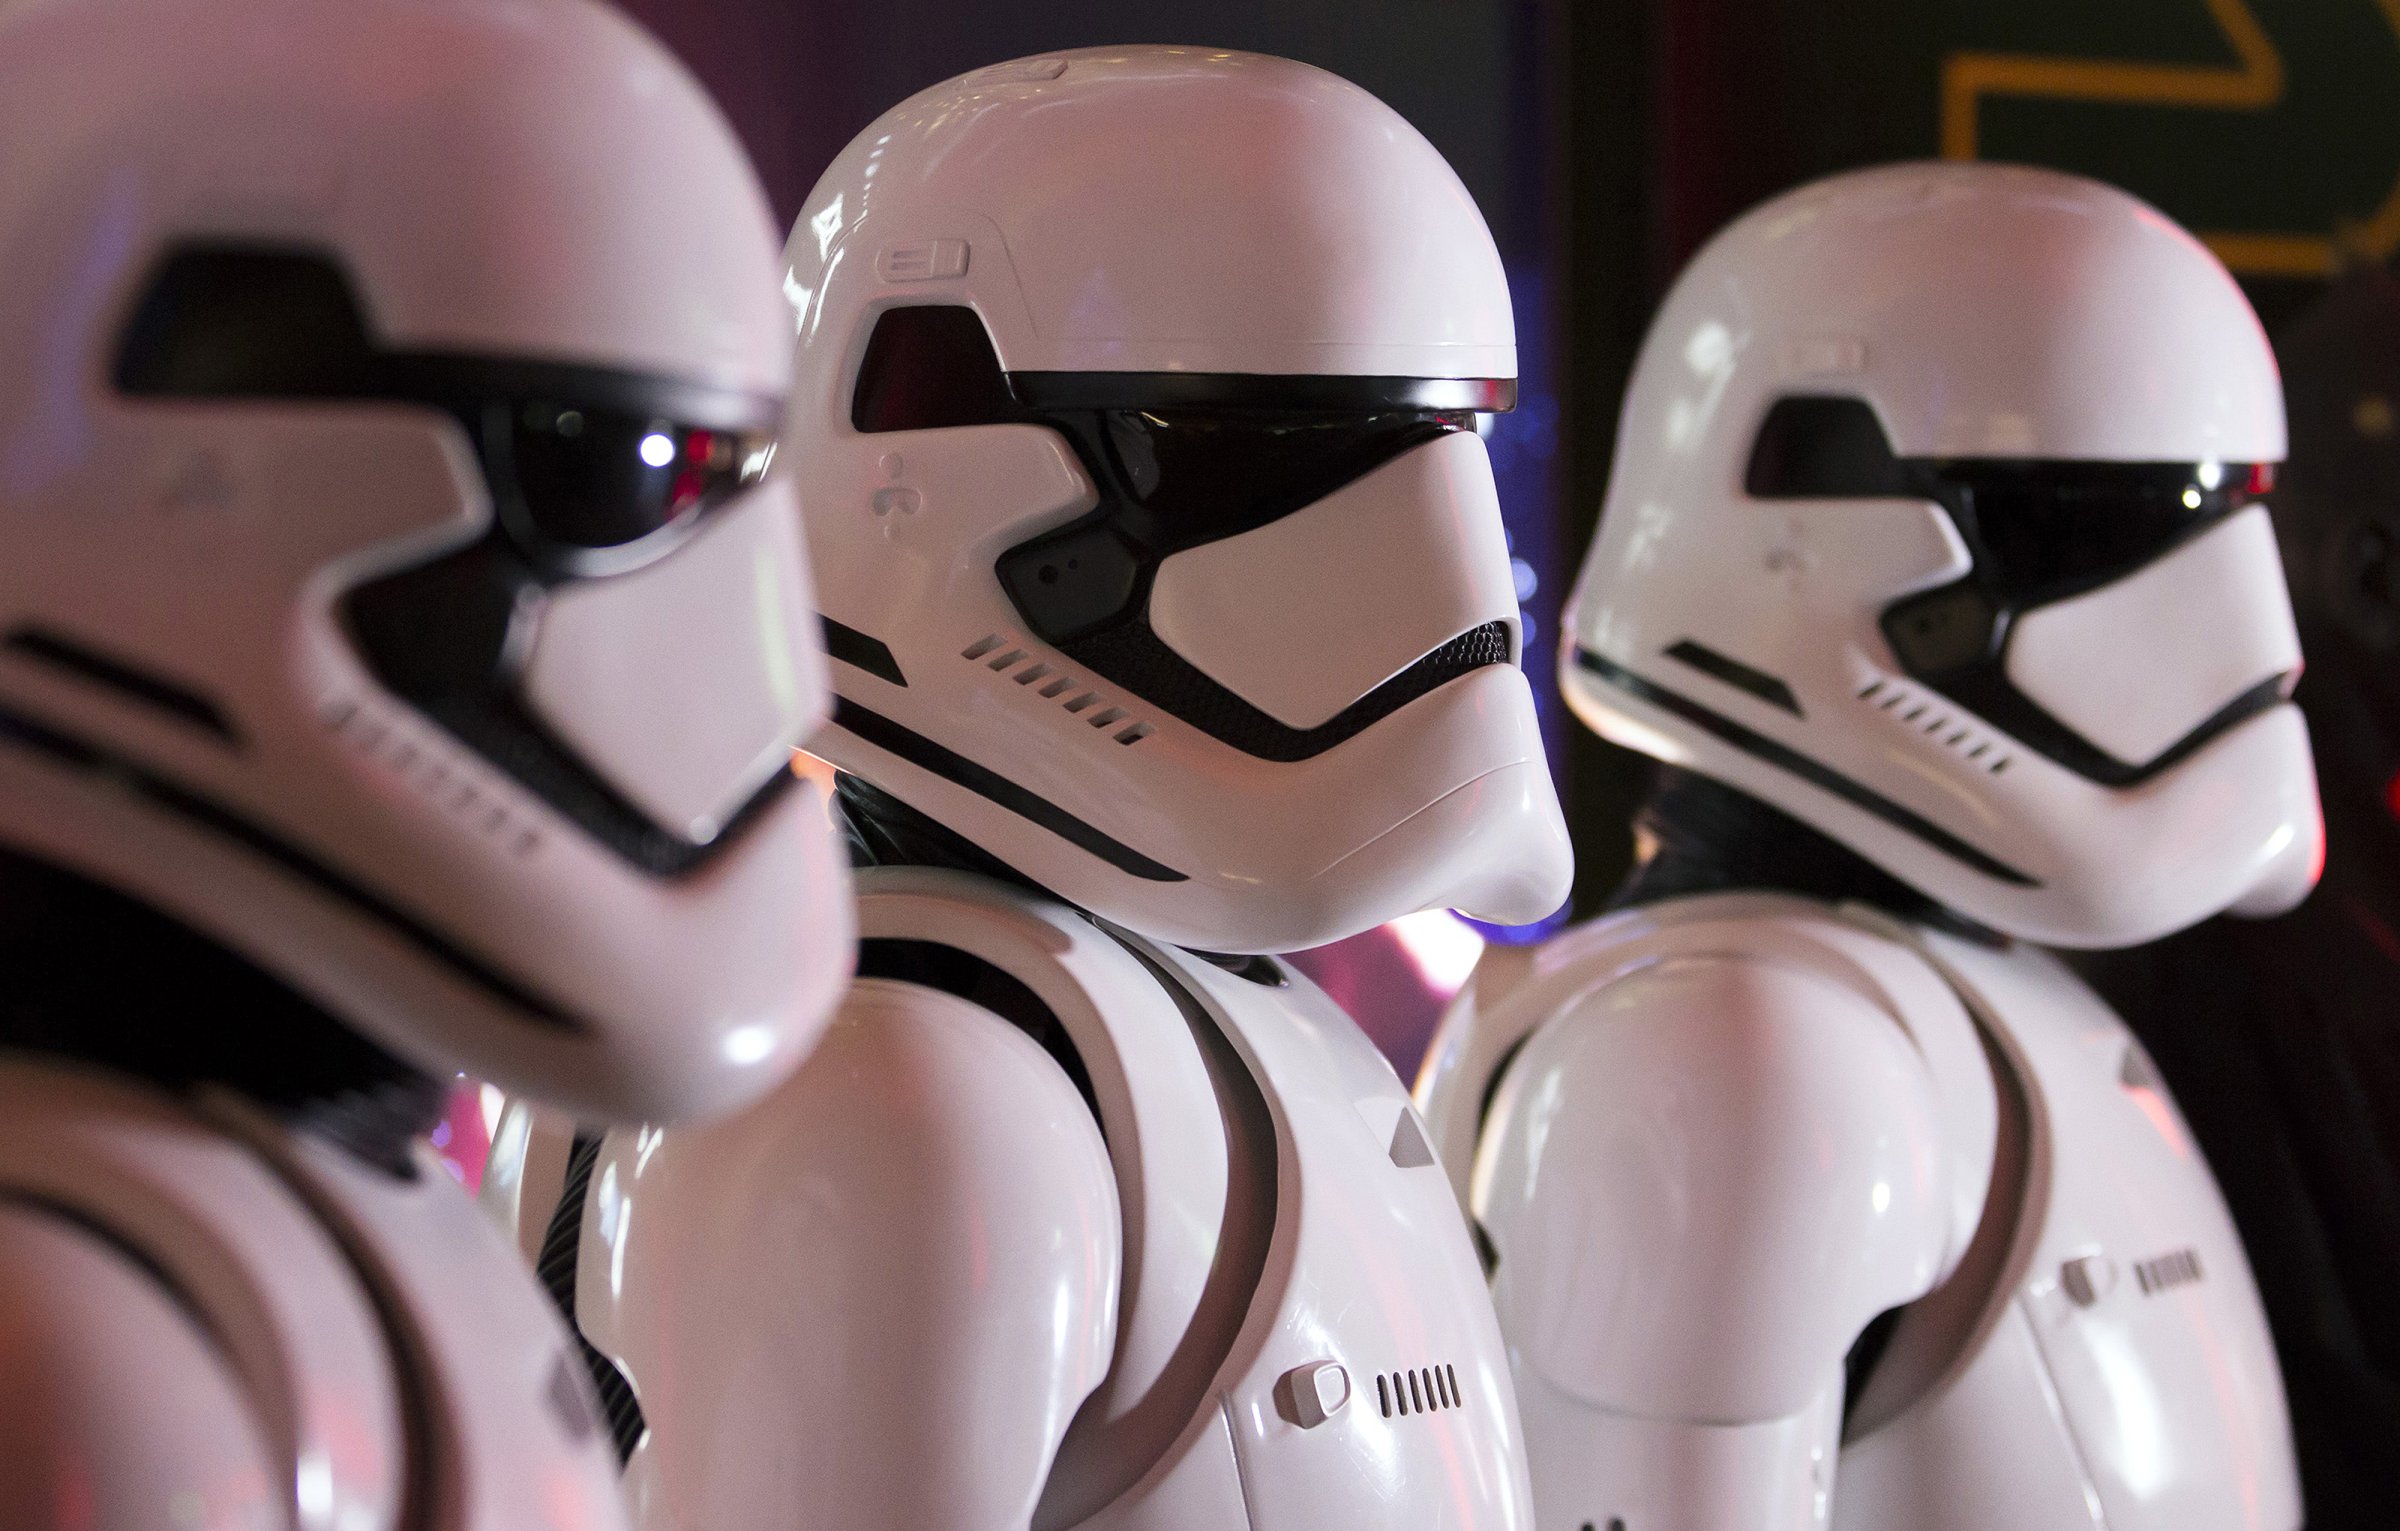 Fans wear Storm Trooper costumes ahead of the first public screening of Walt Disney Co.'s "Star Wars: The Force Awakens" at TOHO Cinemas Roppoing Hills in Tokyo, Japan, on Friday, Dec. 18, 2015.